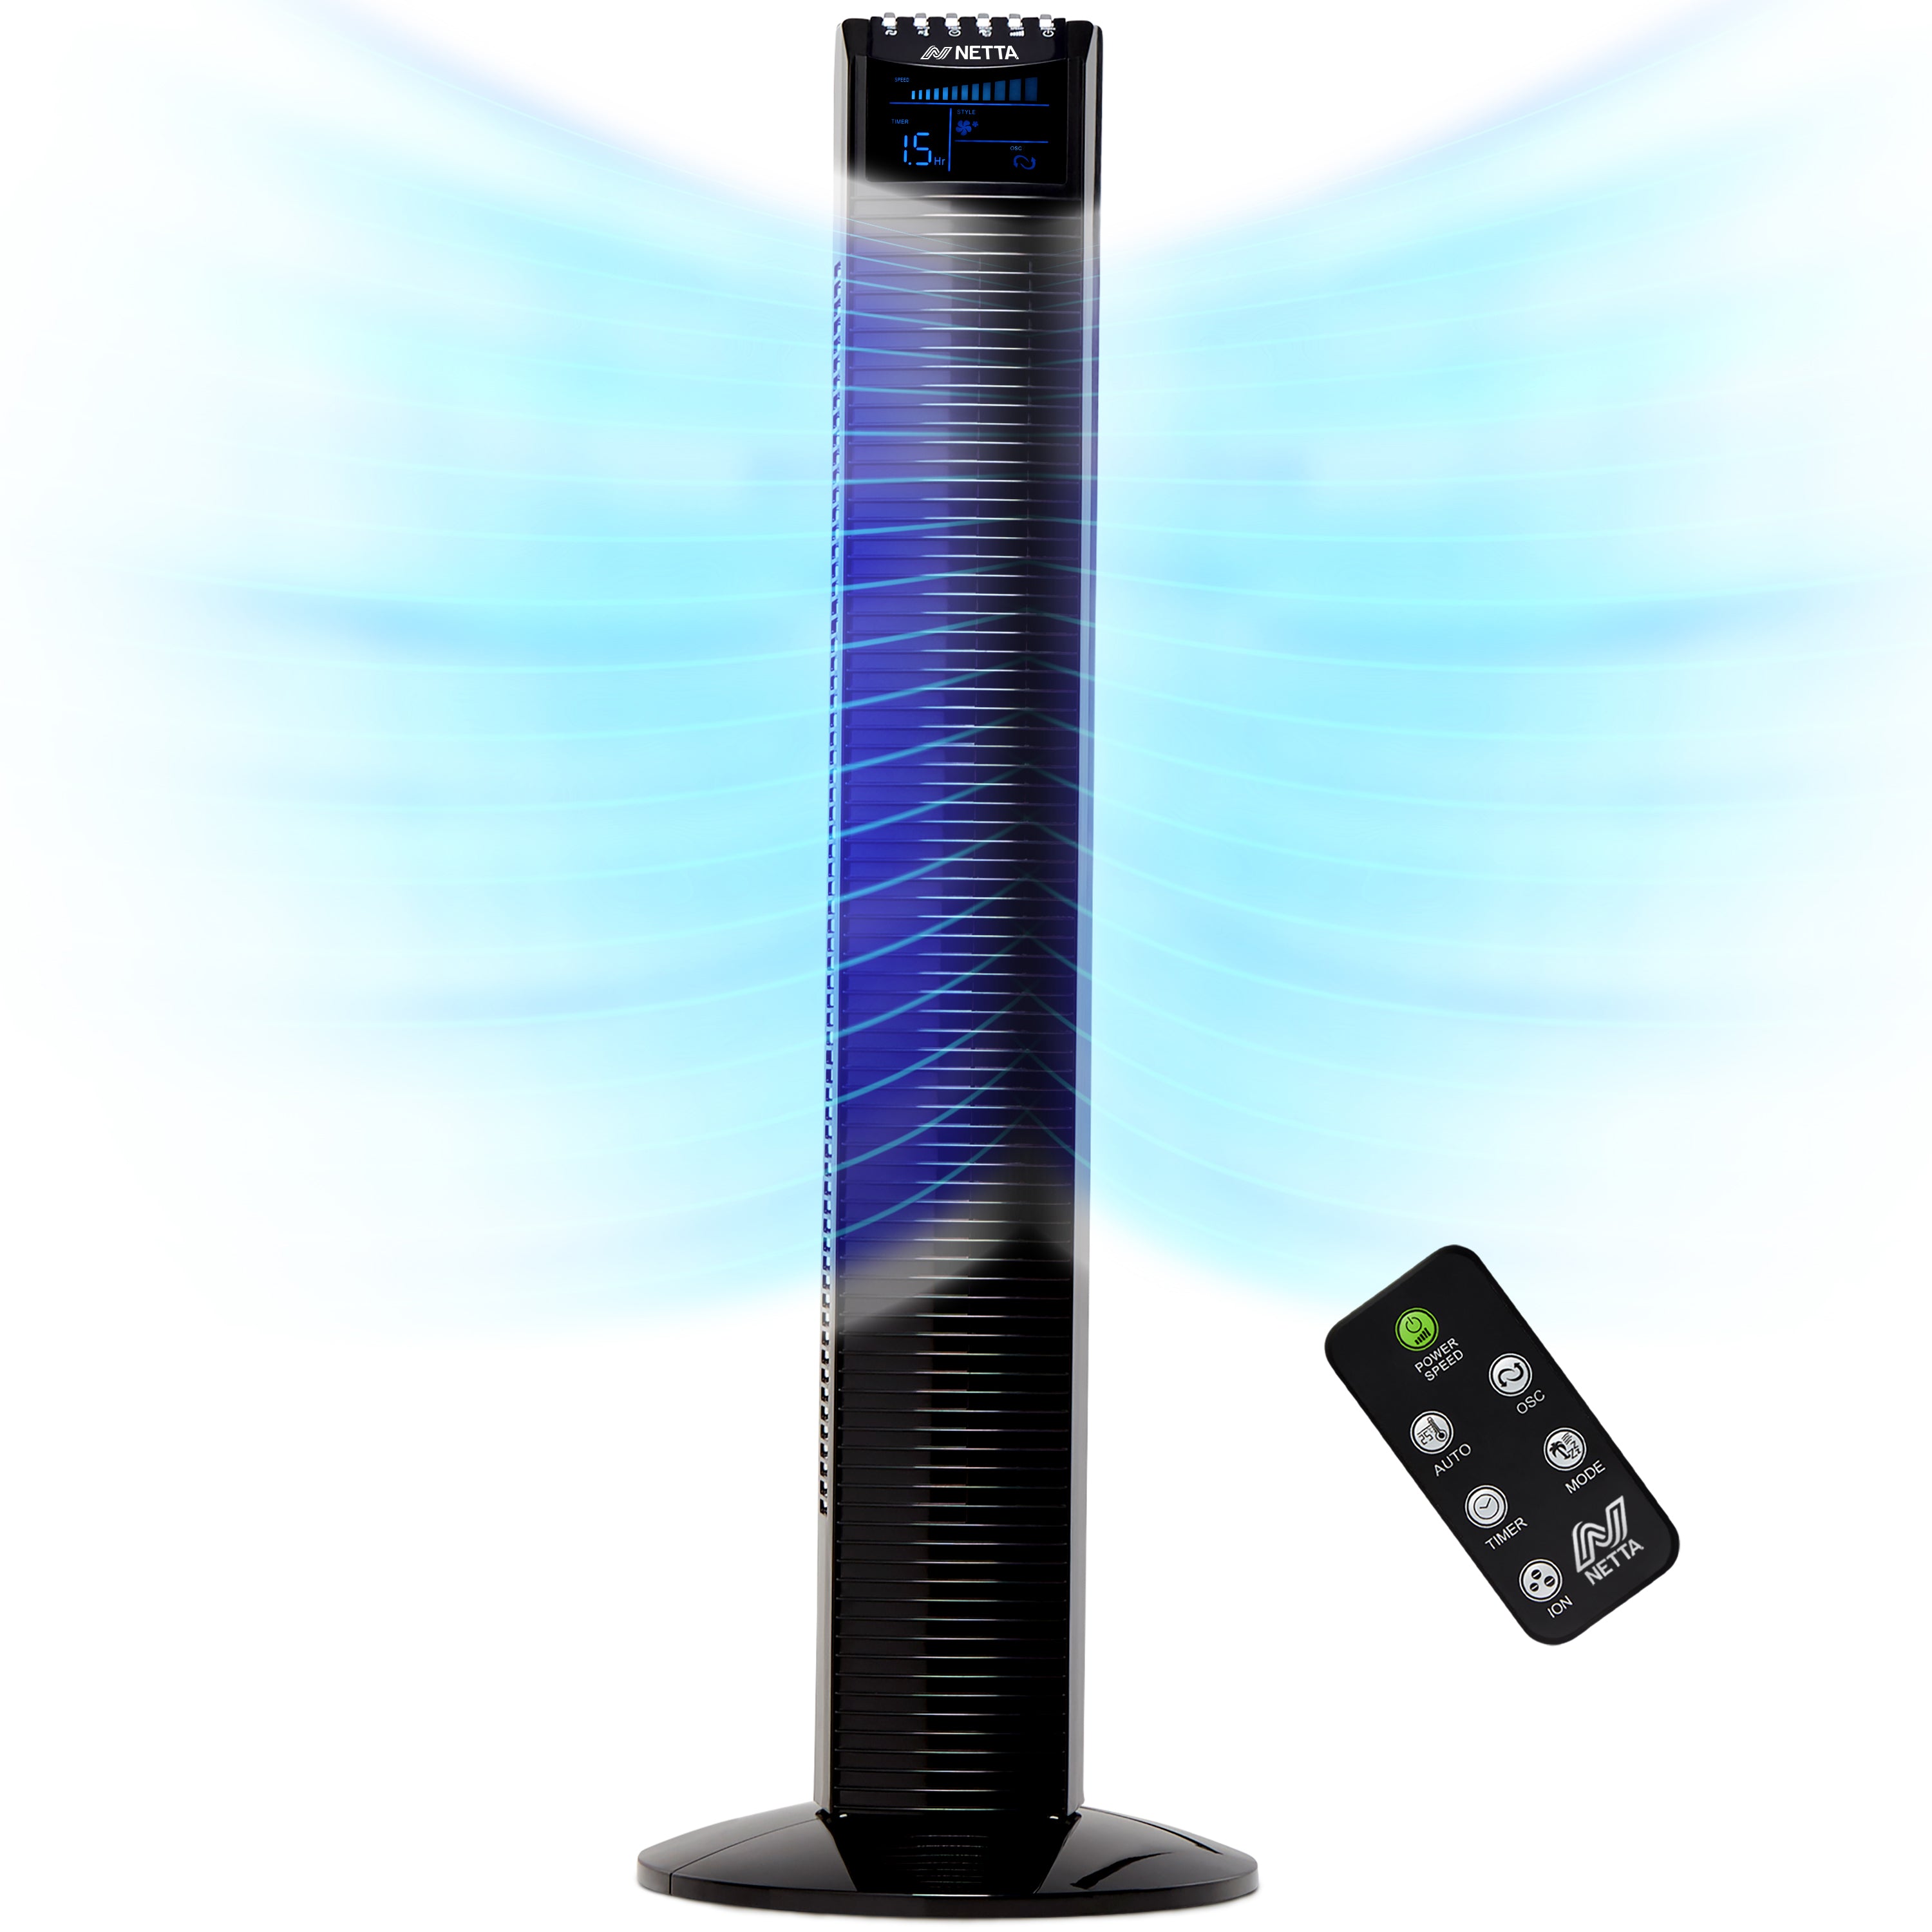 NETTA 36 Inch Tower Fan With Remote Control, Timer Quiet Cooling for Living Room, Bedroom, Office - Black